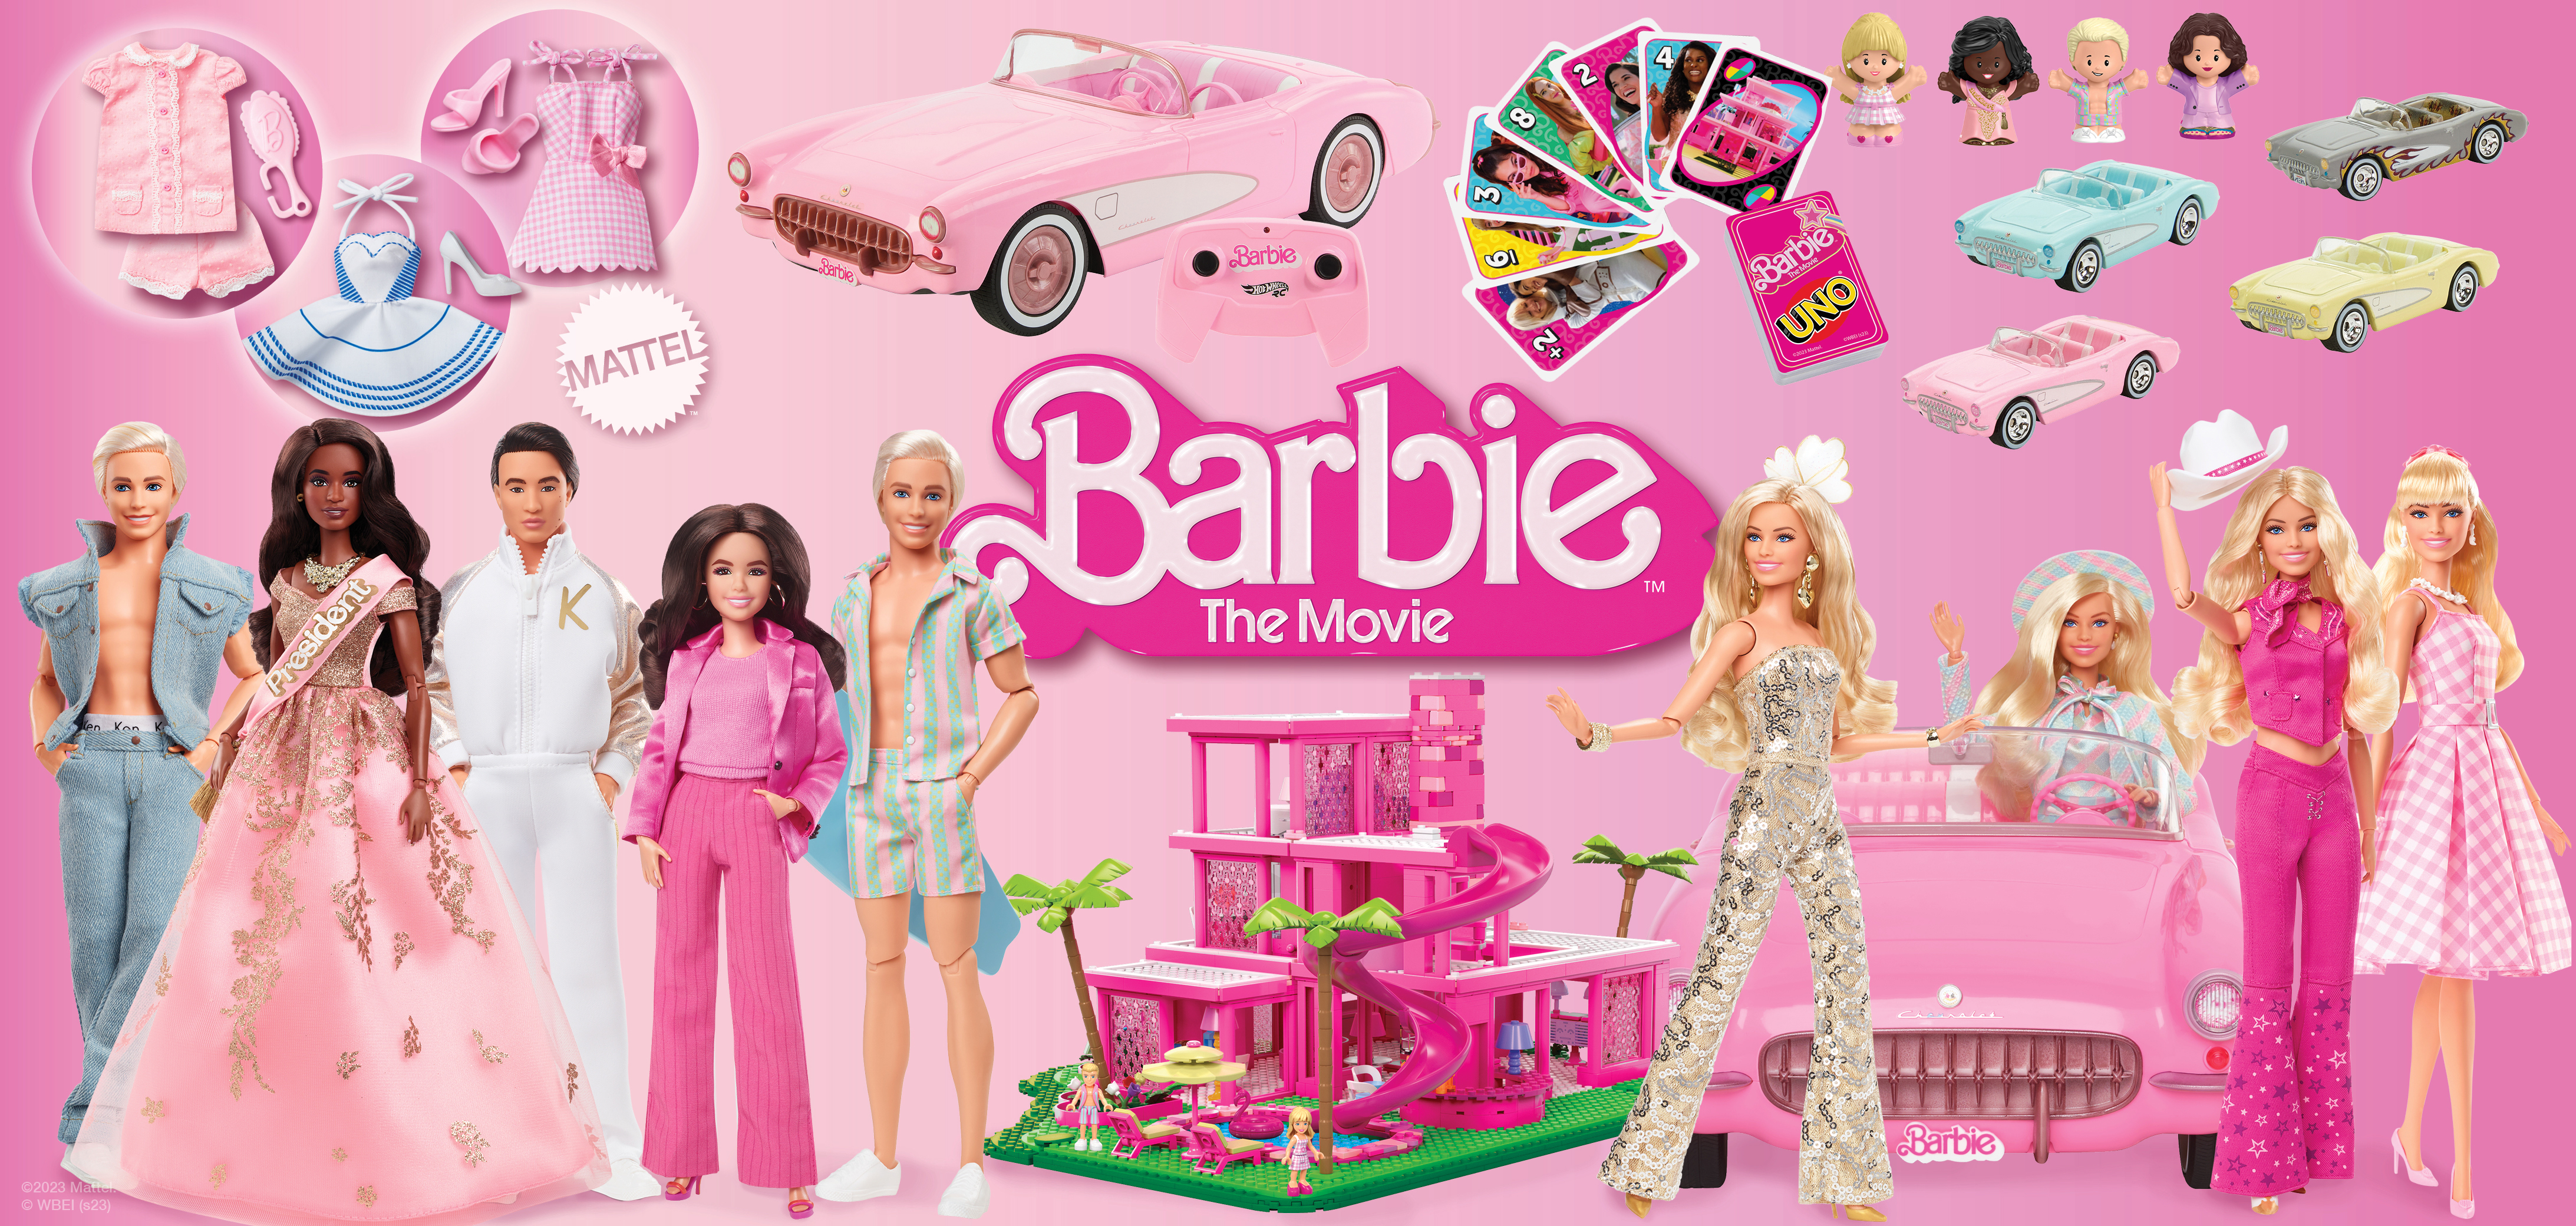 Mattel Announces New Product Collection to Celebrate the Upcoming